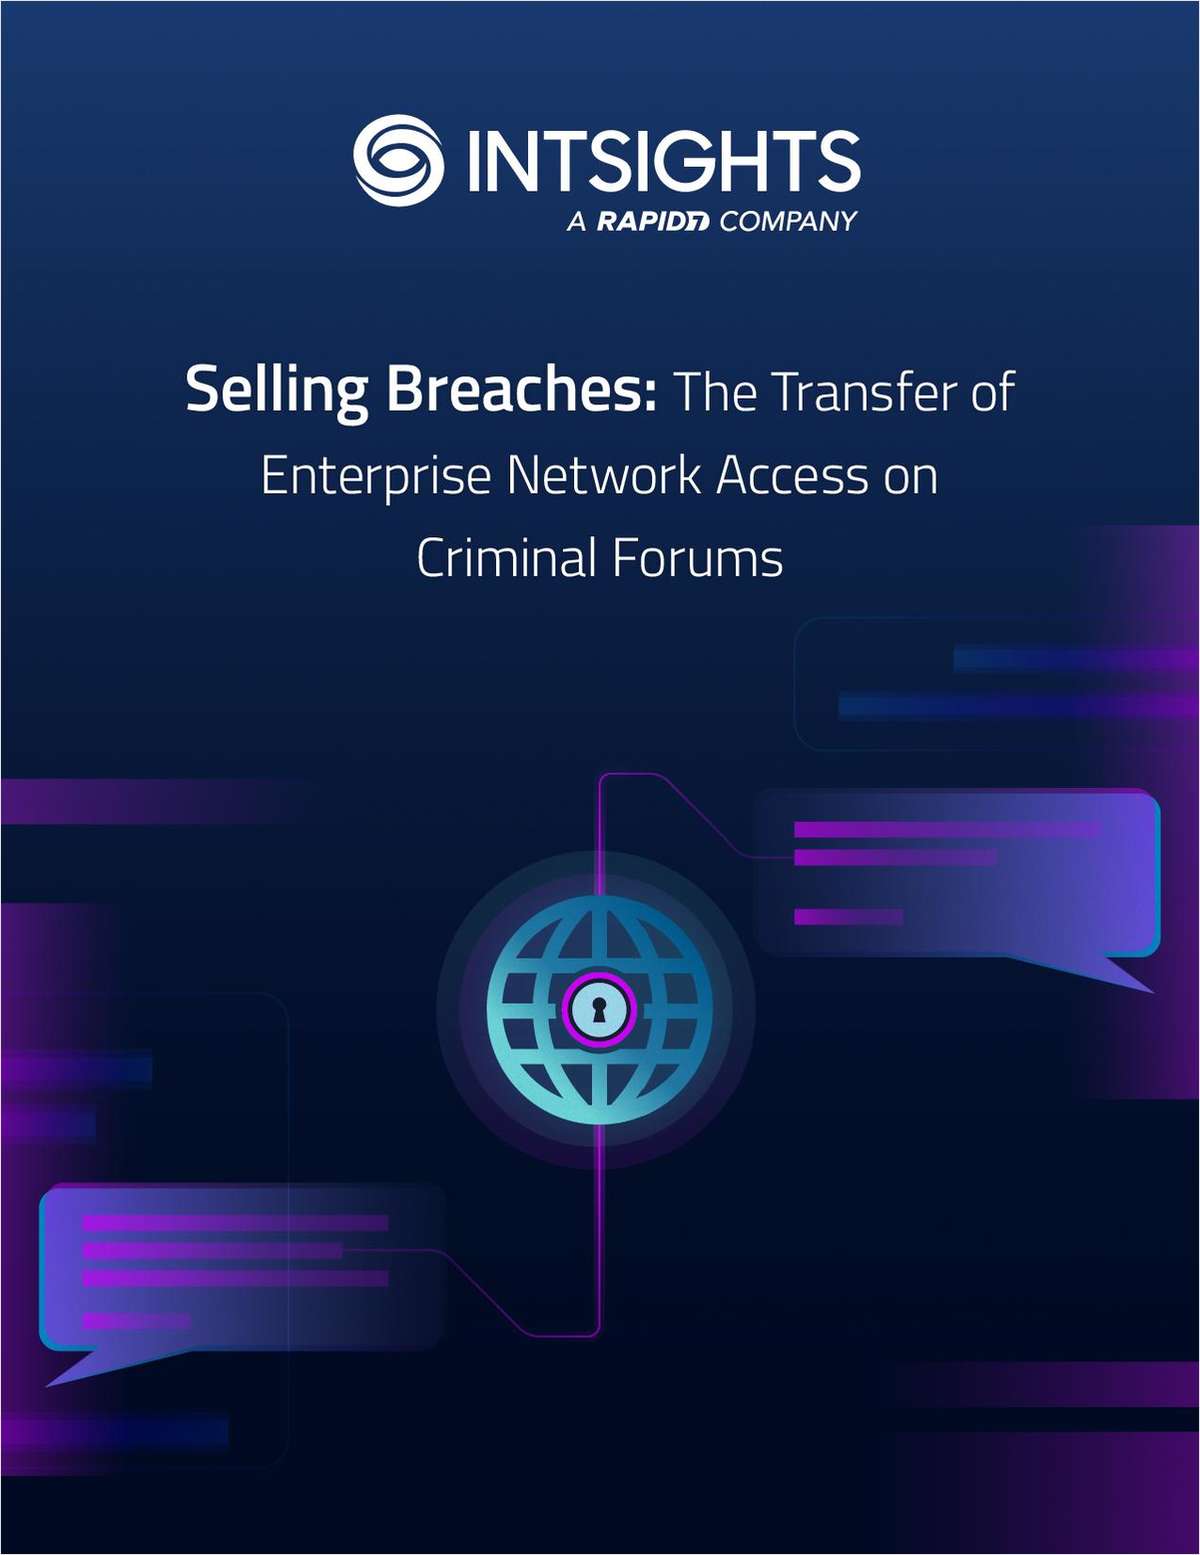 Selling Breaches: The Transfer of Enterprise Network Access on Criminal Forums